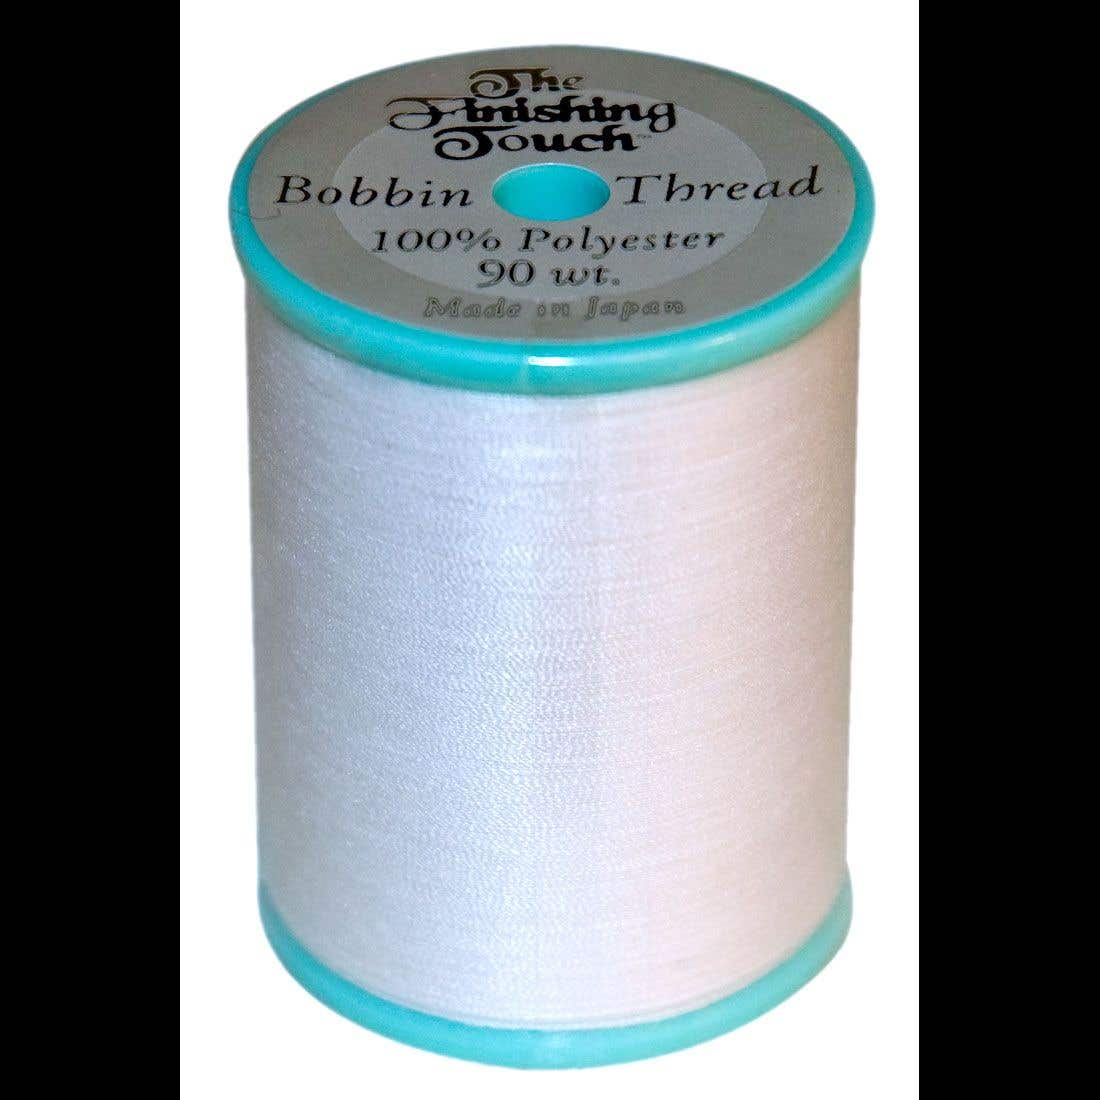 Micro Embroidery & Bobbin Thread 60 Wt No. 124 - Old Gold- 1000 Meters